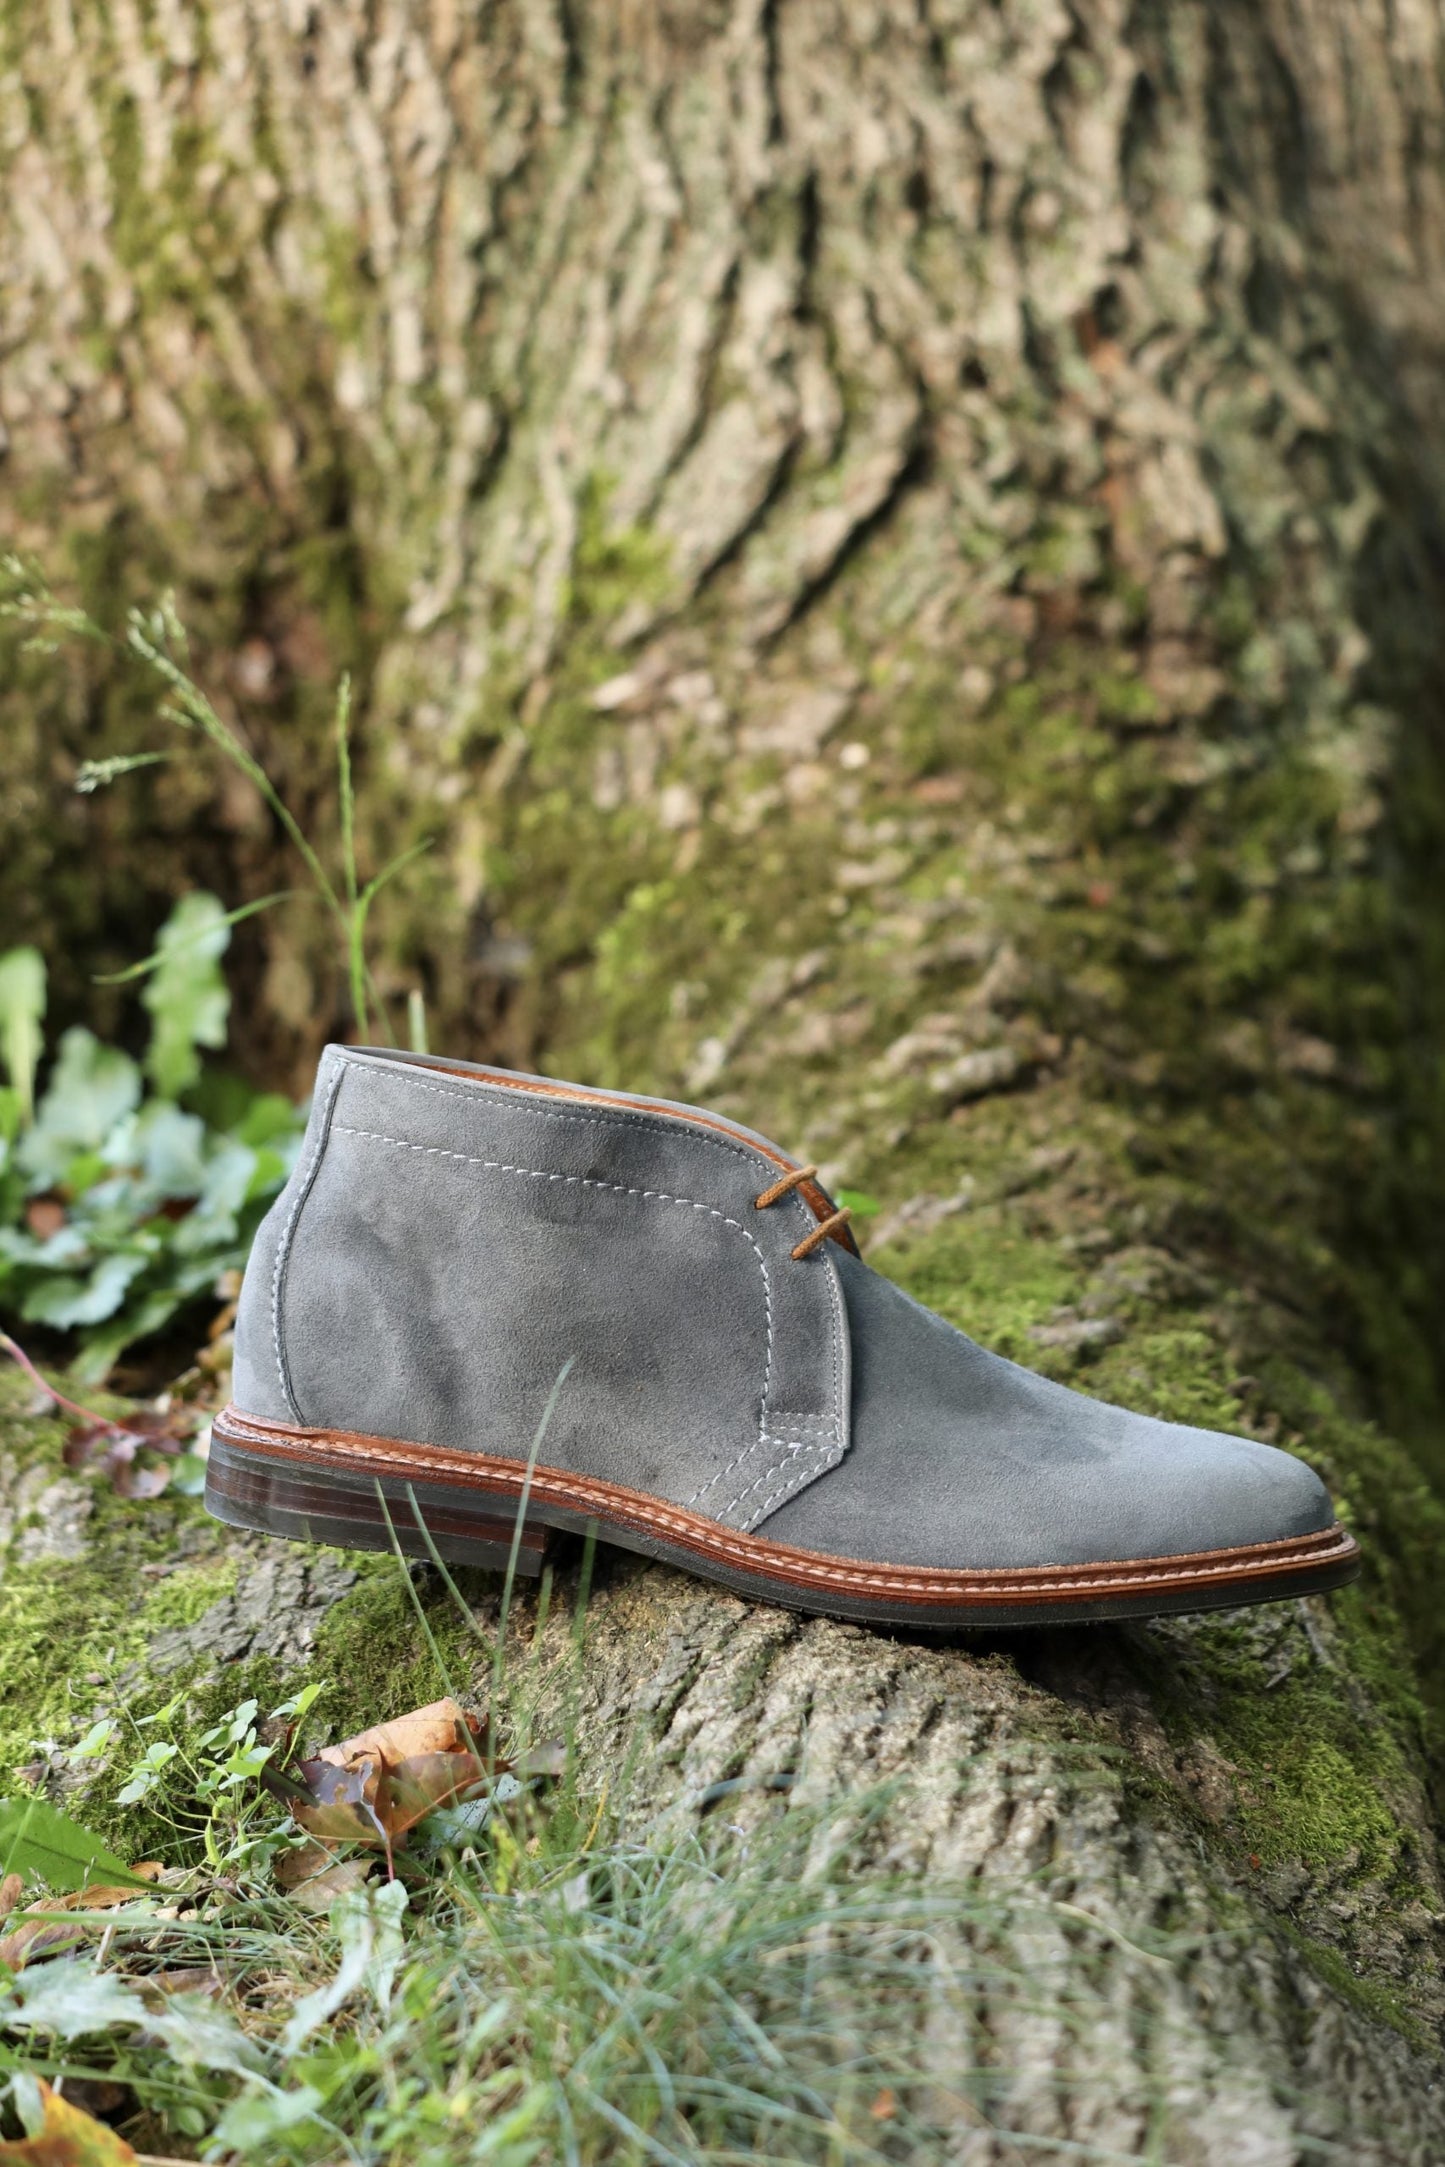 1592L - Chukka Boot with L3 Sole in Lead Suede